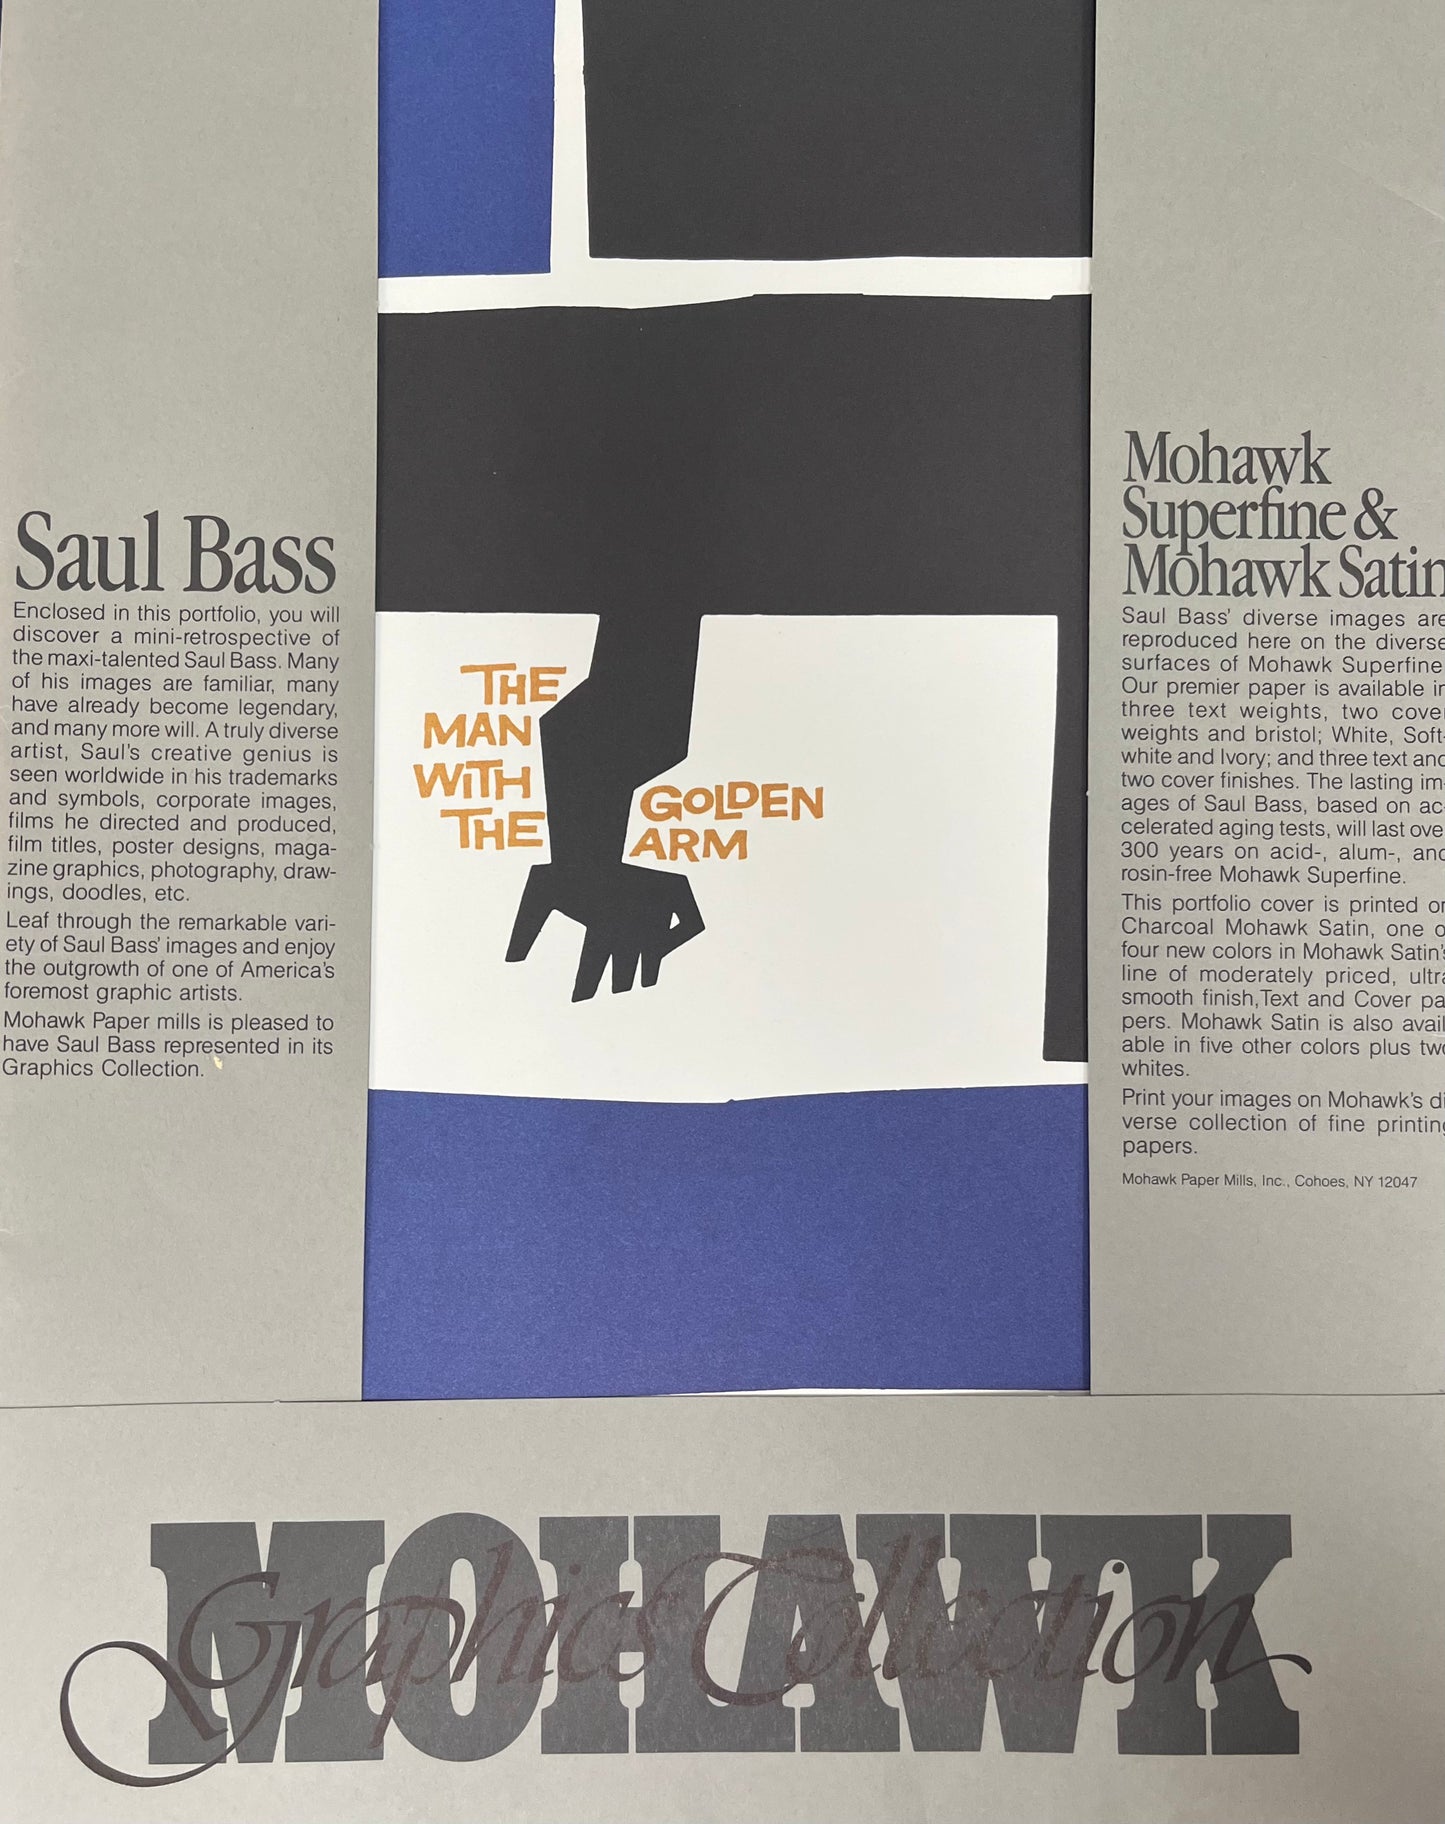 Saul Bass: Mohawk Graphics Collection, 1984